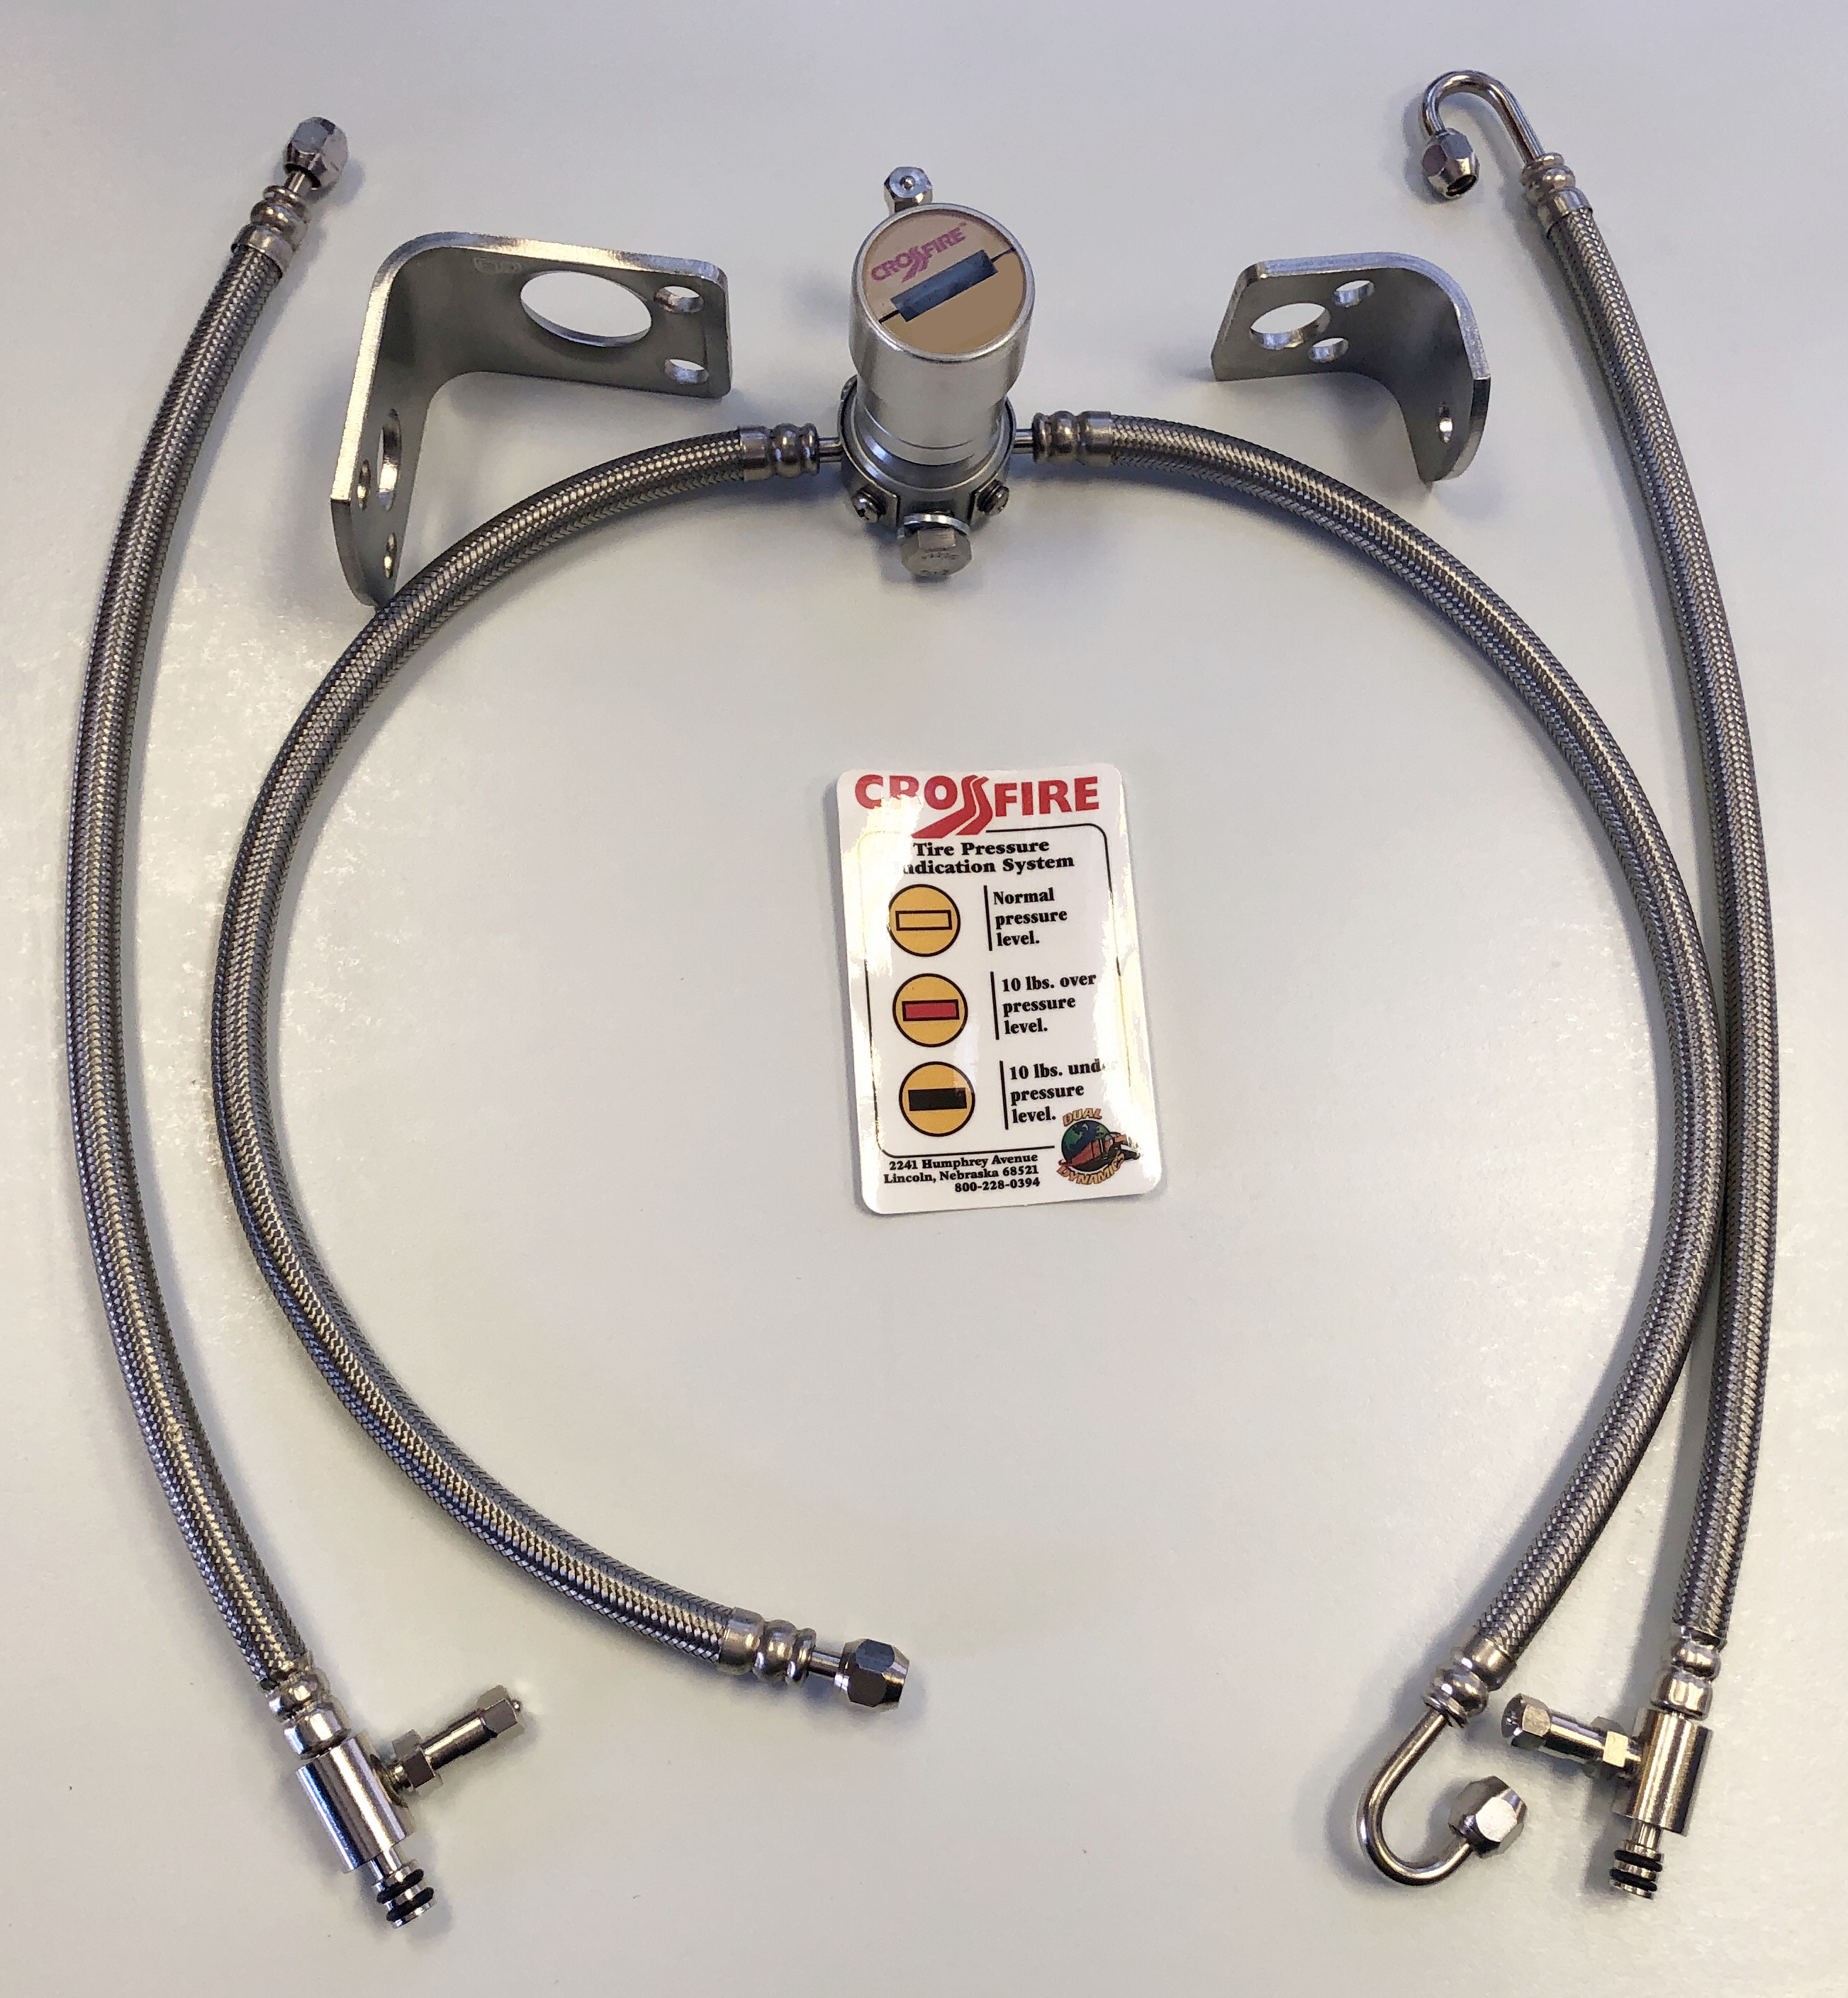 CROSSFIRE TIRE EQUALIZER SYSTEM 70 PSI STAINLESS STEEL HOSES